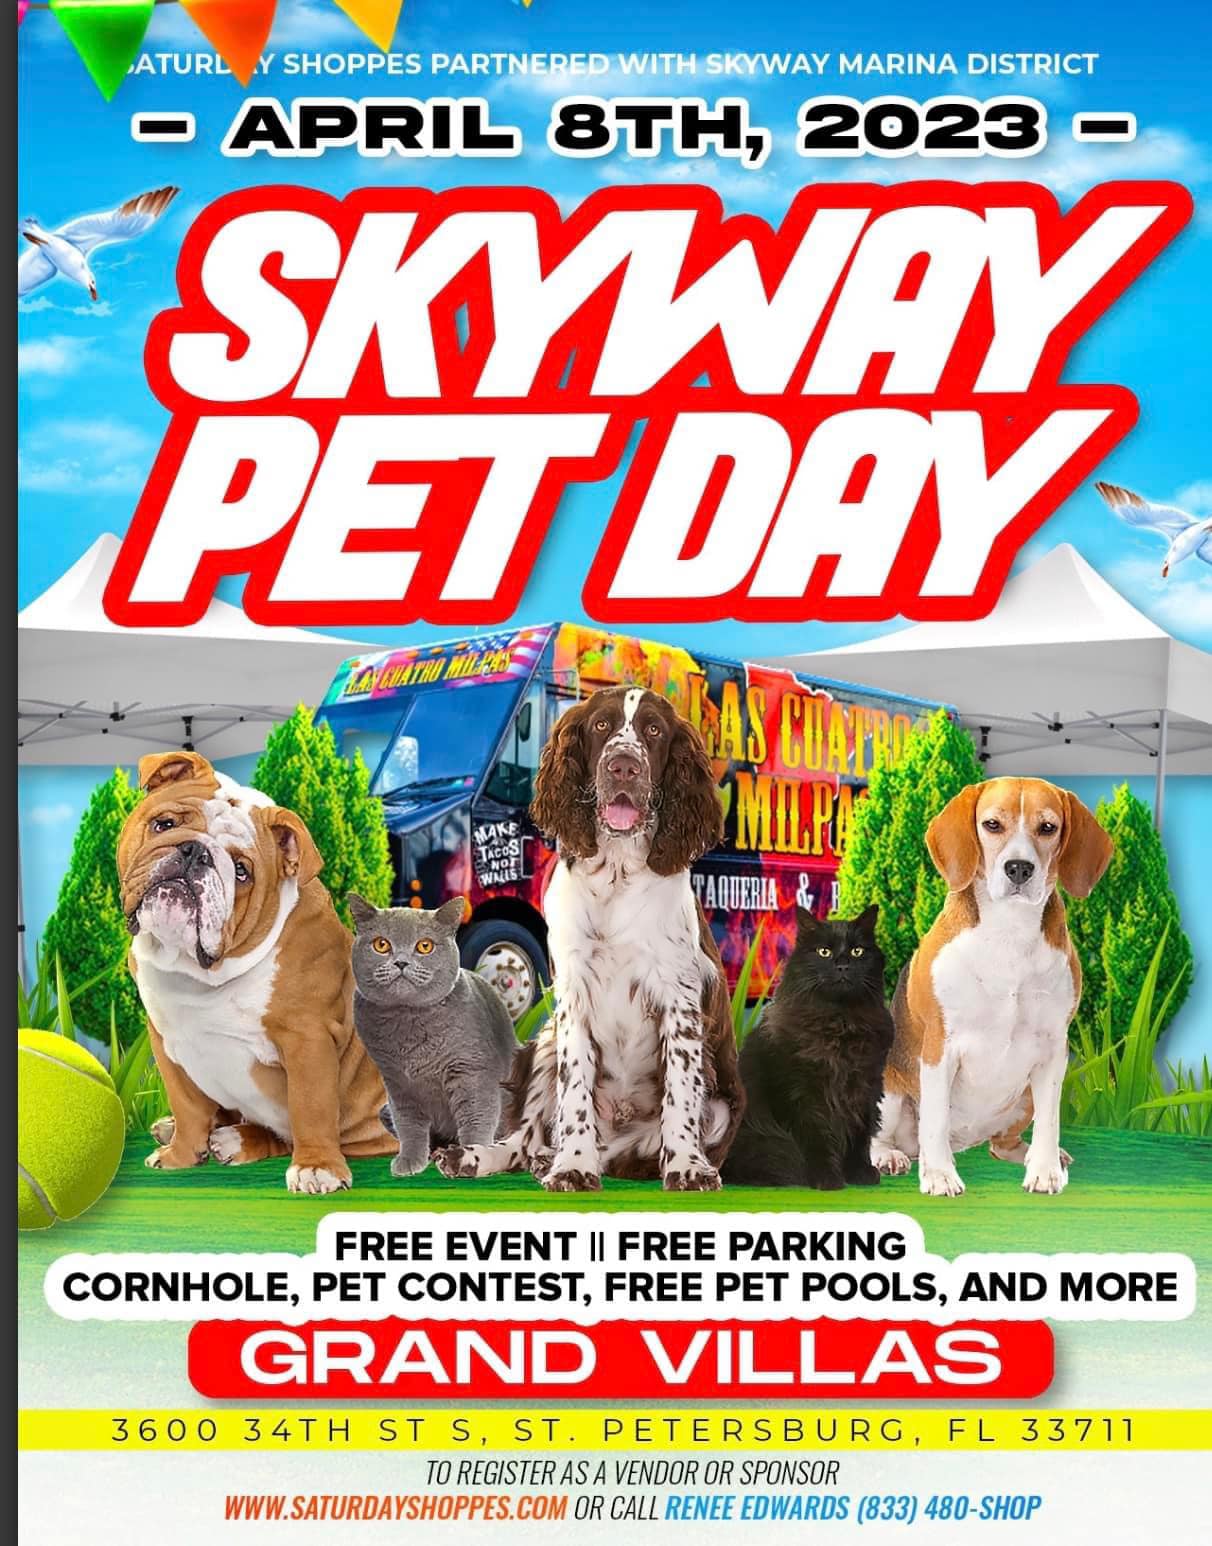 Indigo Scooters at Skyway Pet Day: A Pawsitively Successful Saturday Shoppes Event